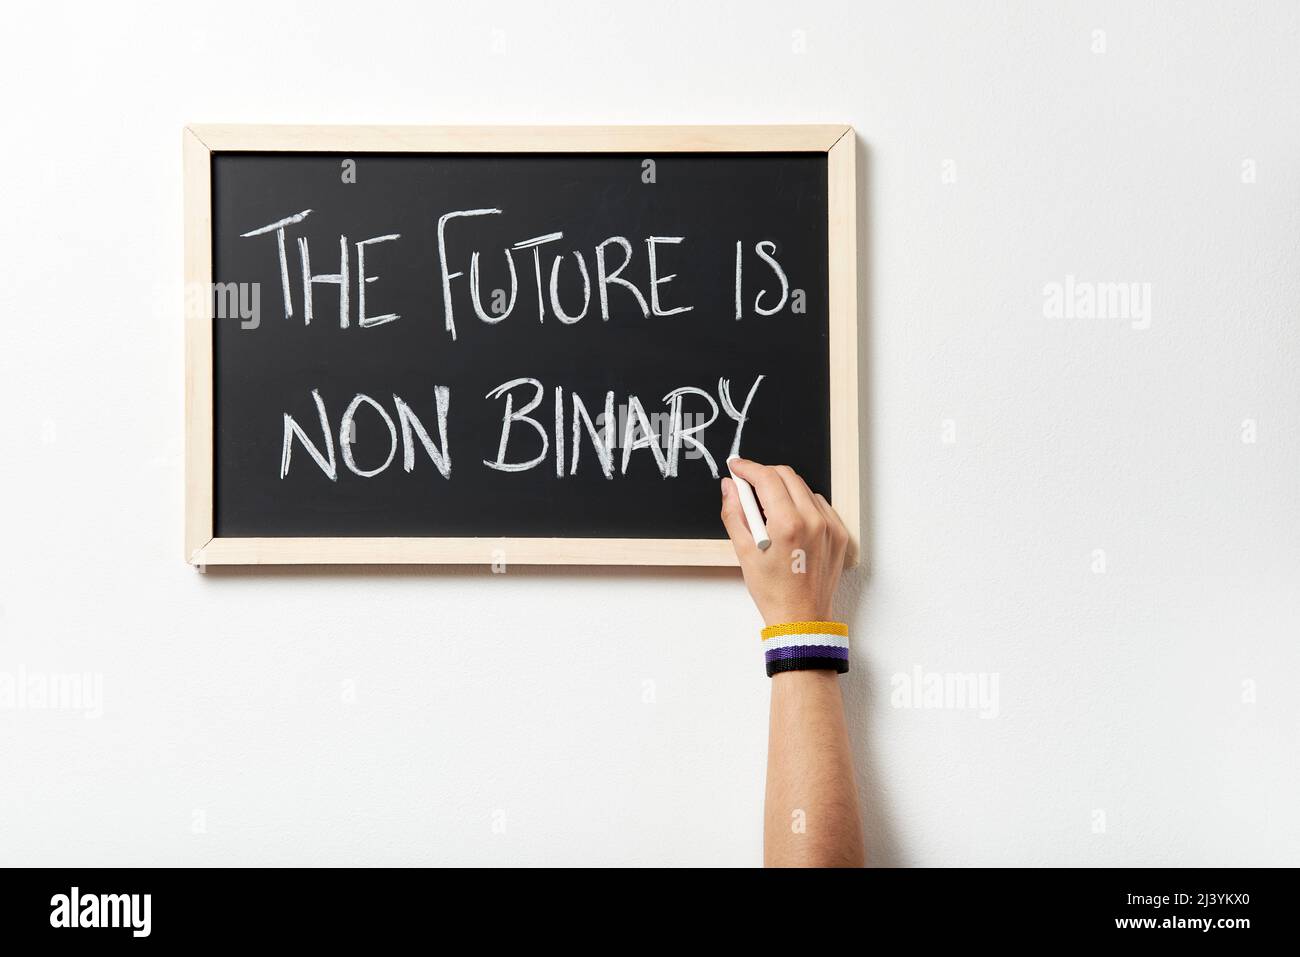 Hand with symbolic bracelet chalking the text The future is non binary on a blackboard. Concept of respect for gender diversity. Stock Photo